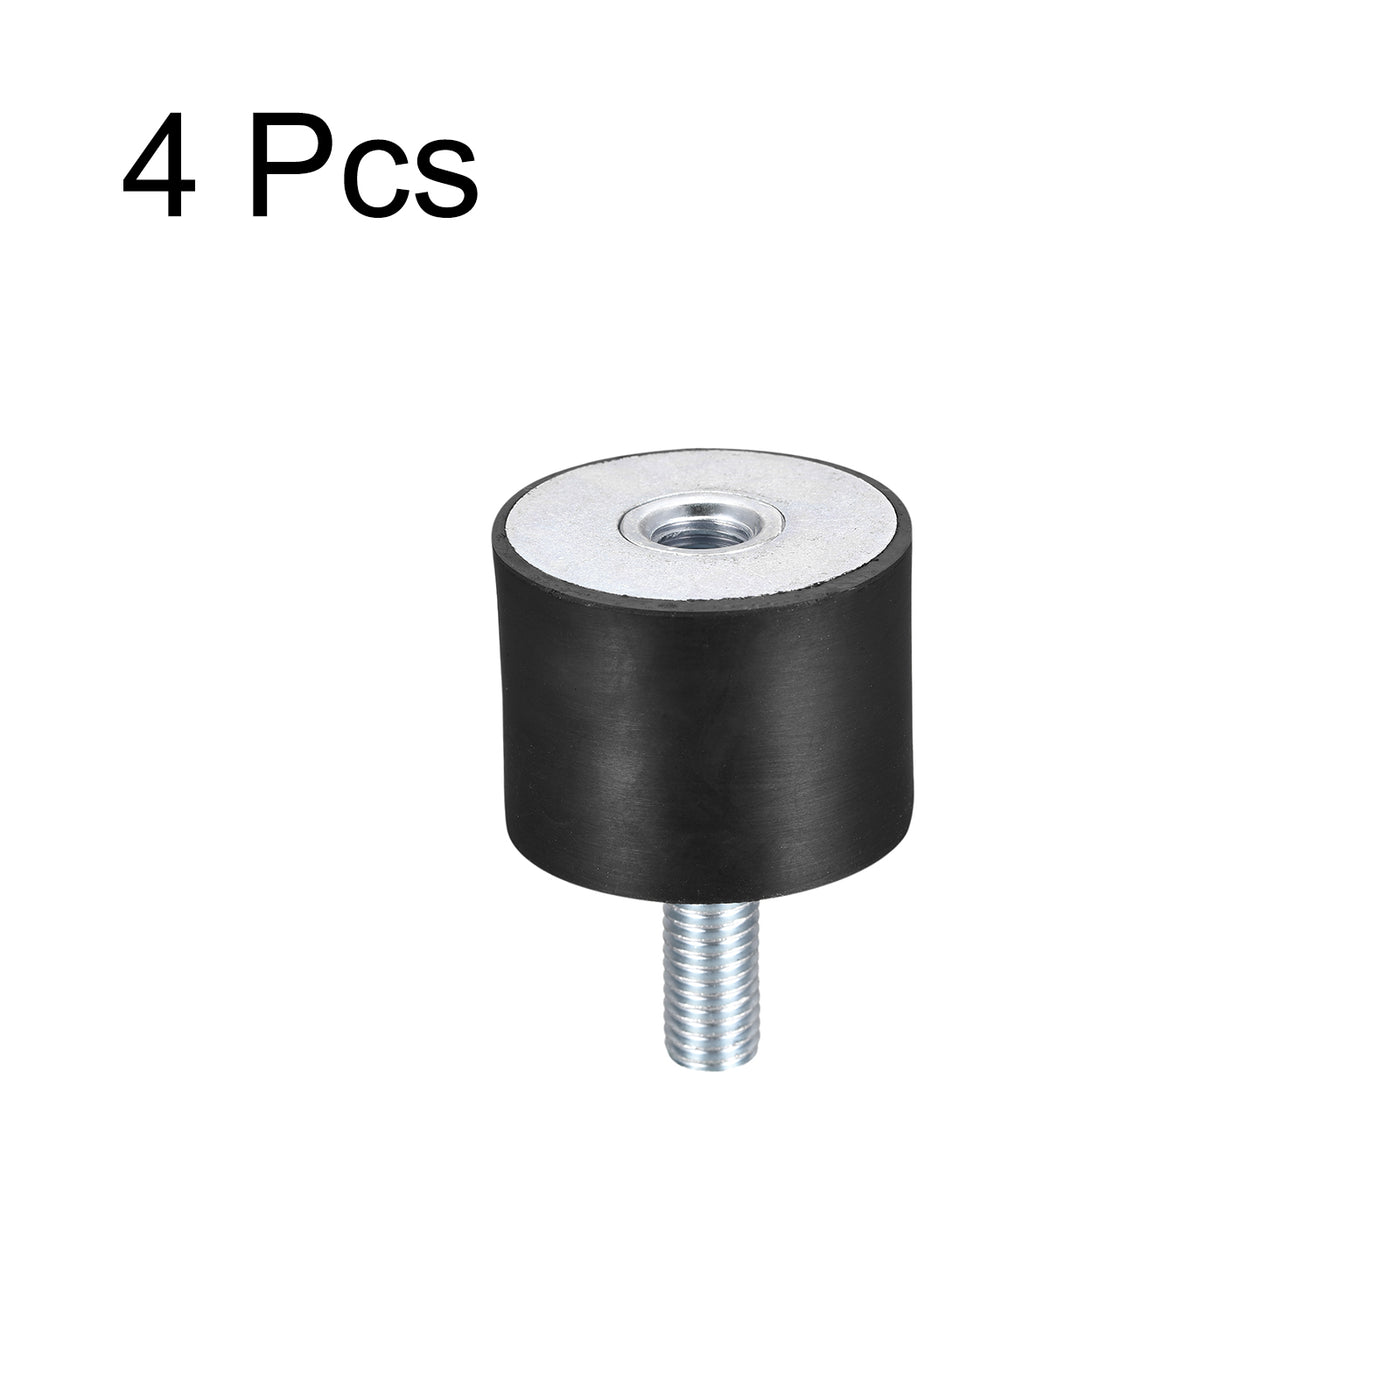 uxcell Uxcell Rubber Mount 4pcs M10 Male/Female Vibration Isolator Shock Absorber D40mmxH30mm